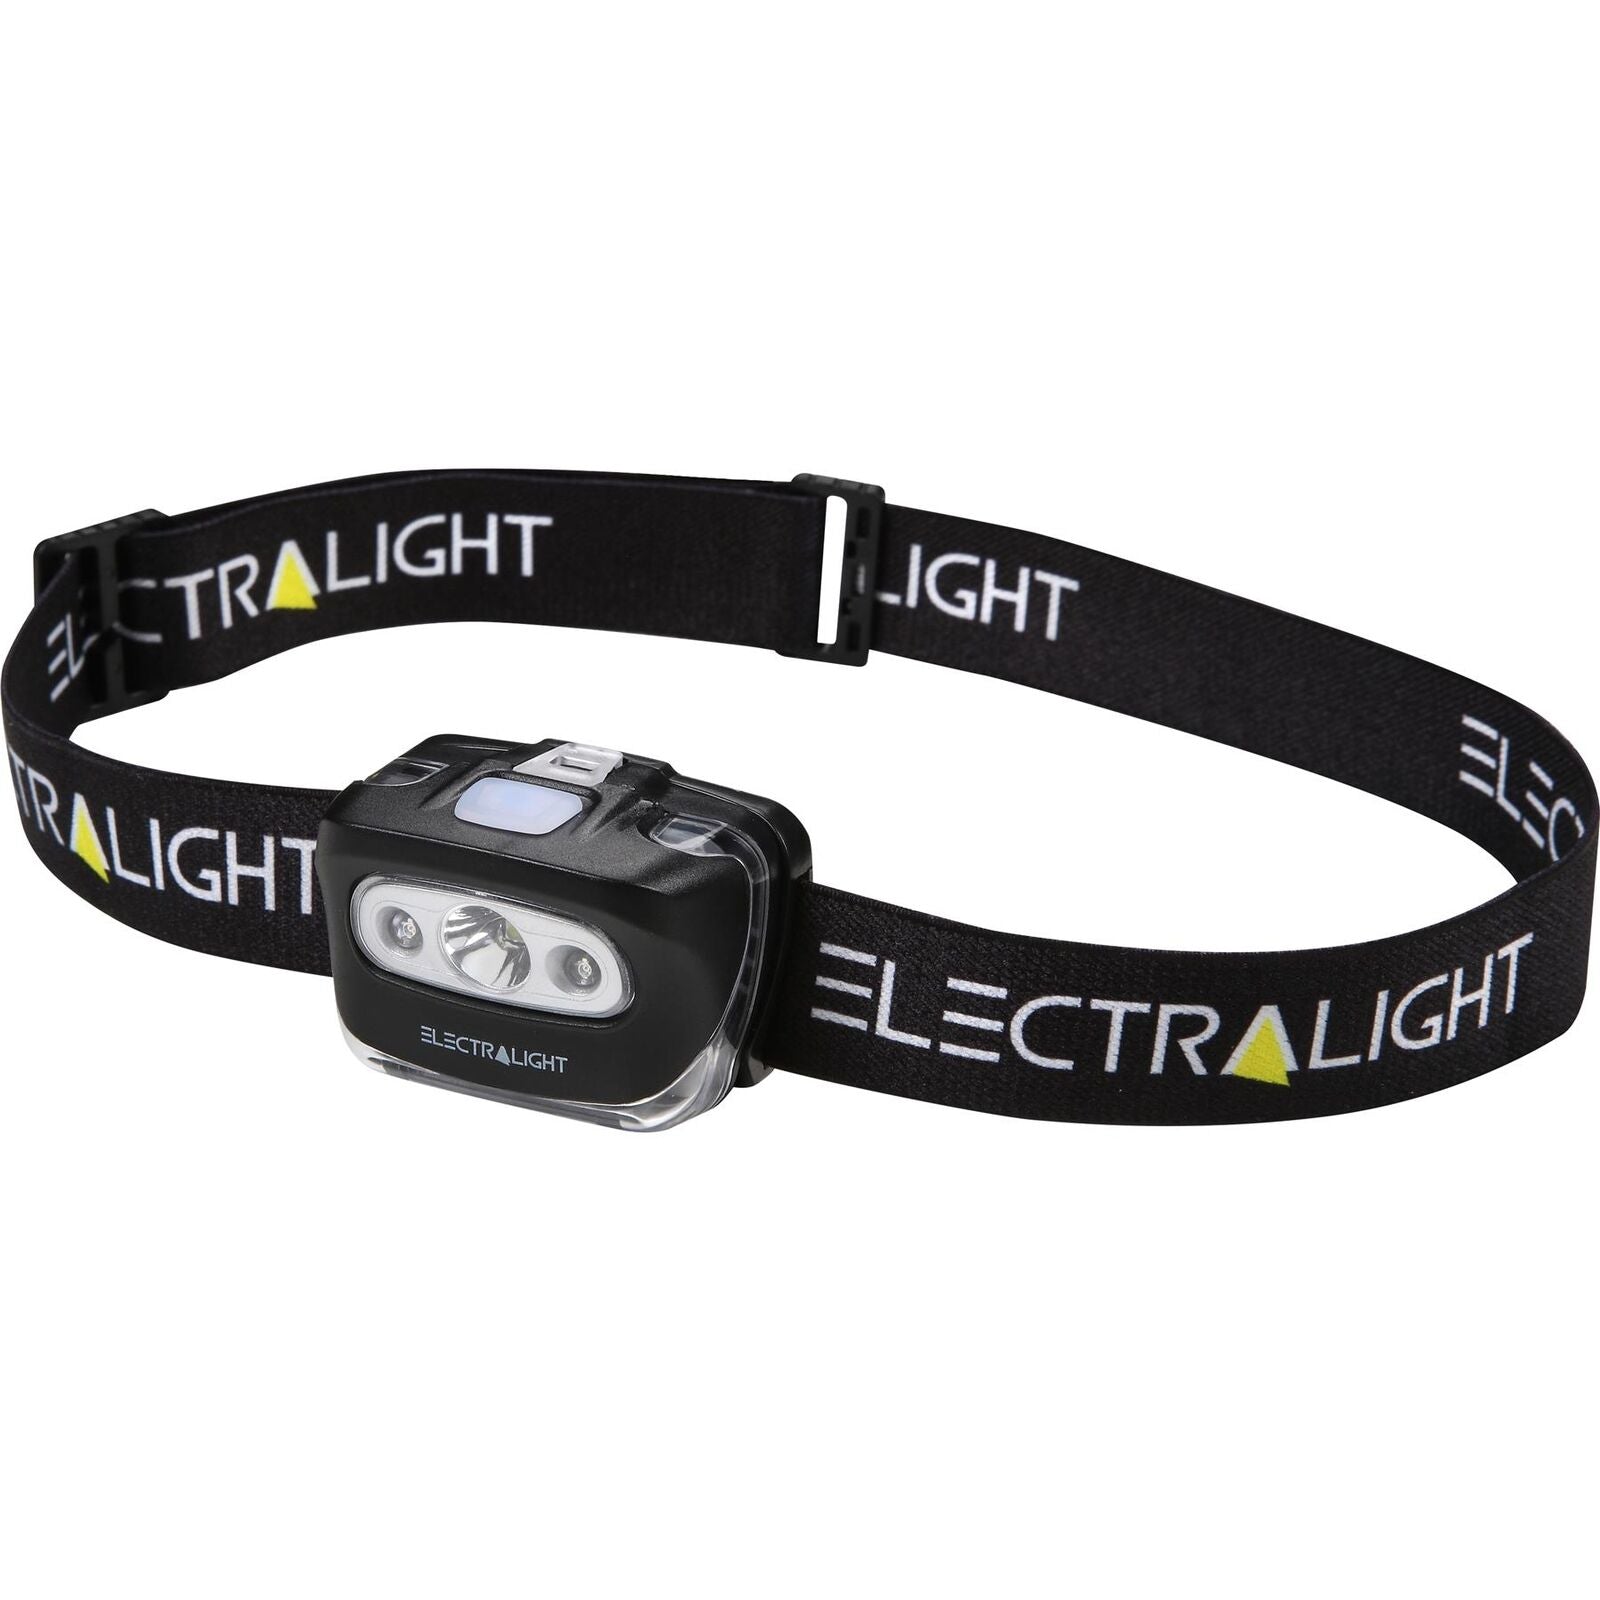 Electralight Cob Led Head Torch Multi-function Headlamp 200 Lumen With Batteries